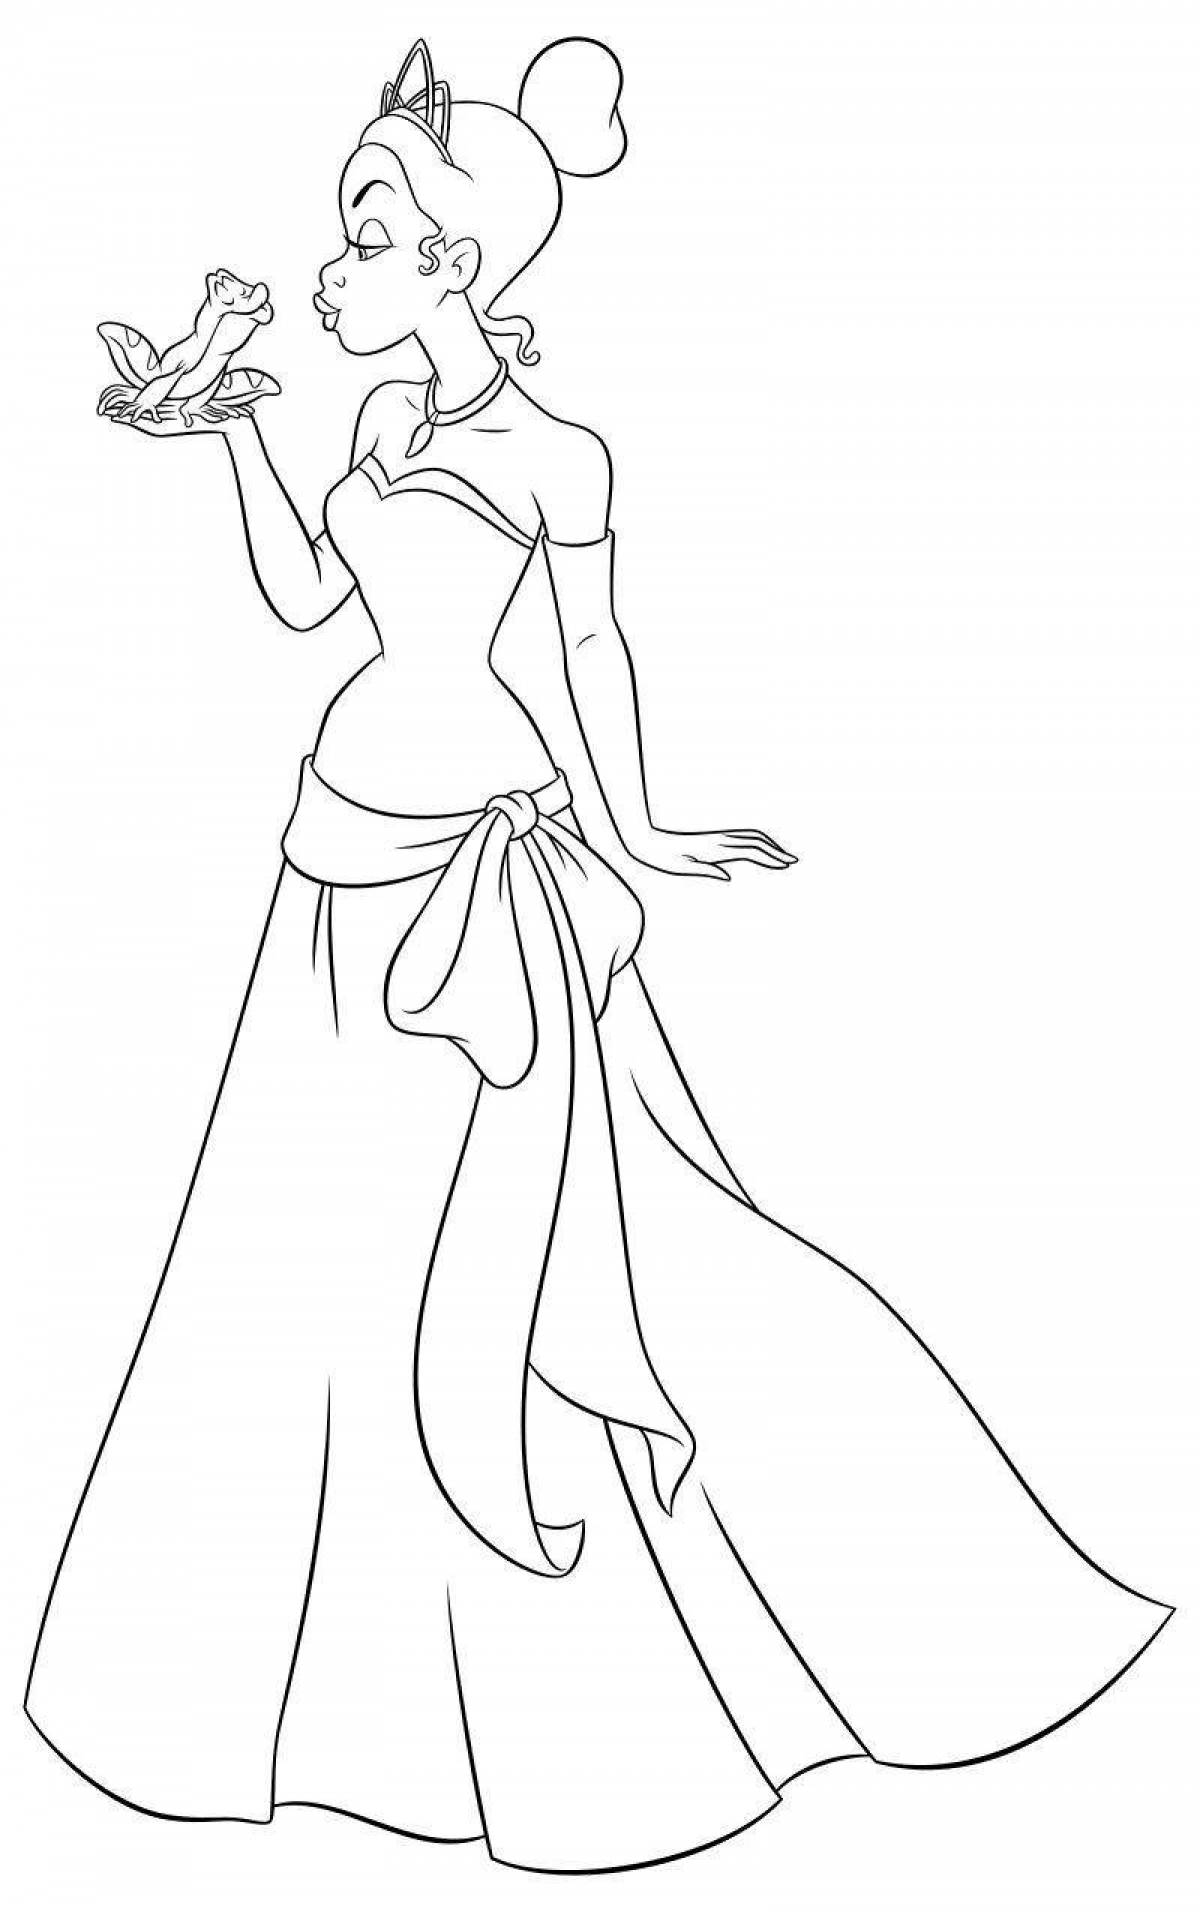 Playful tiana coloring page